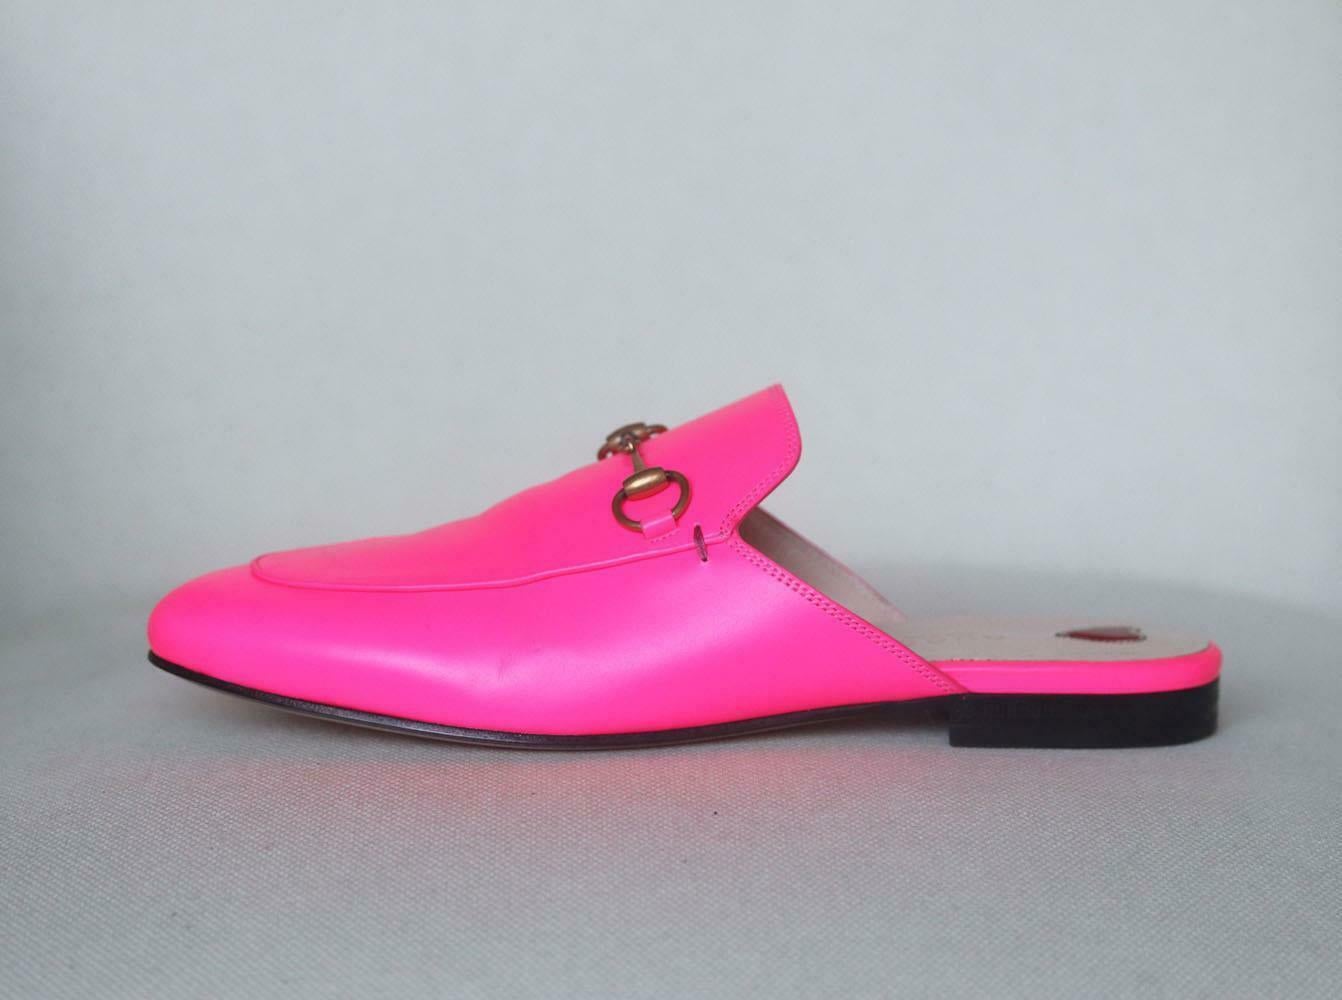 Switch your loafers for Gucci's chic slipper versions this spring, they're crafted from smooth neon-pink leather and are a versatile option for the office or evenings out, this almond-toe pair is adorned with the house's iconic horsebit plaque. Heel